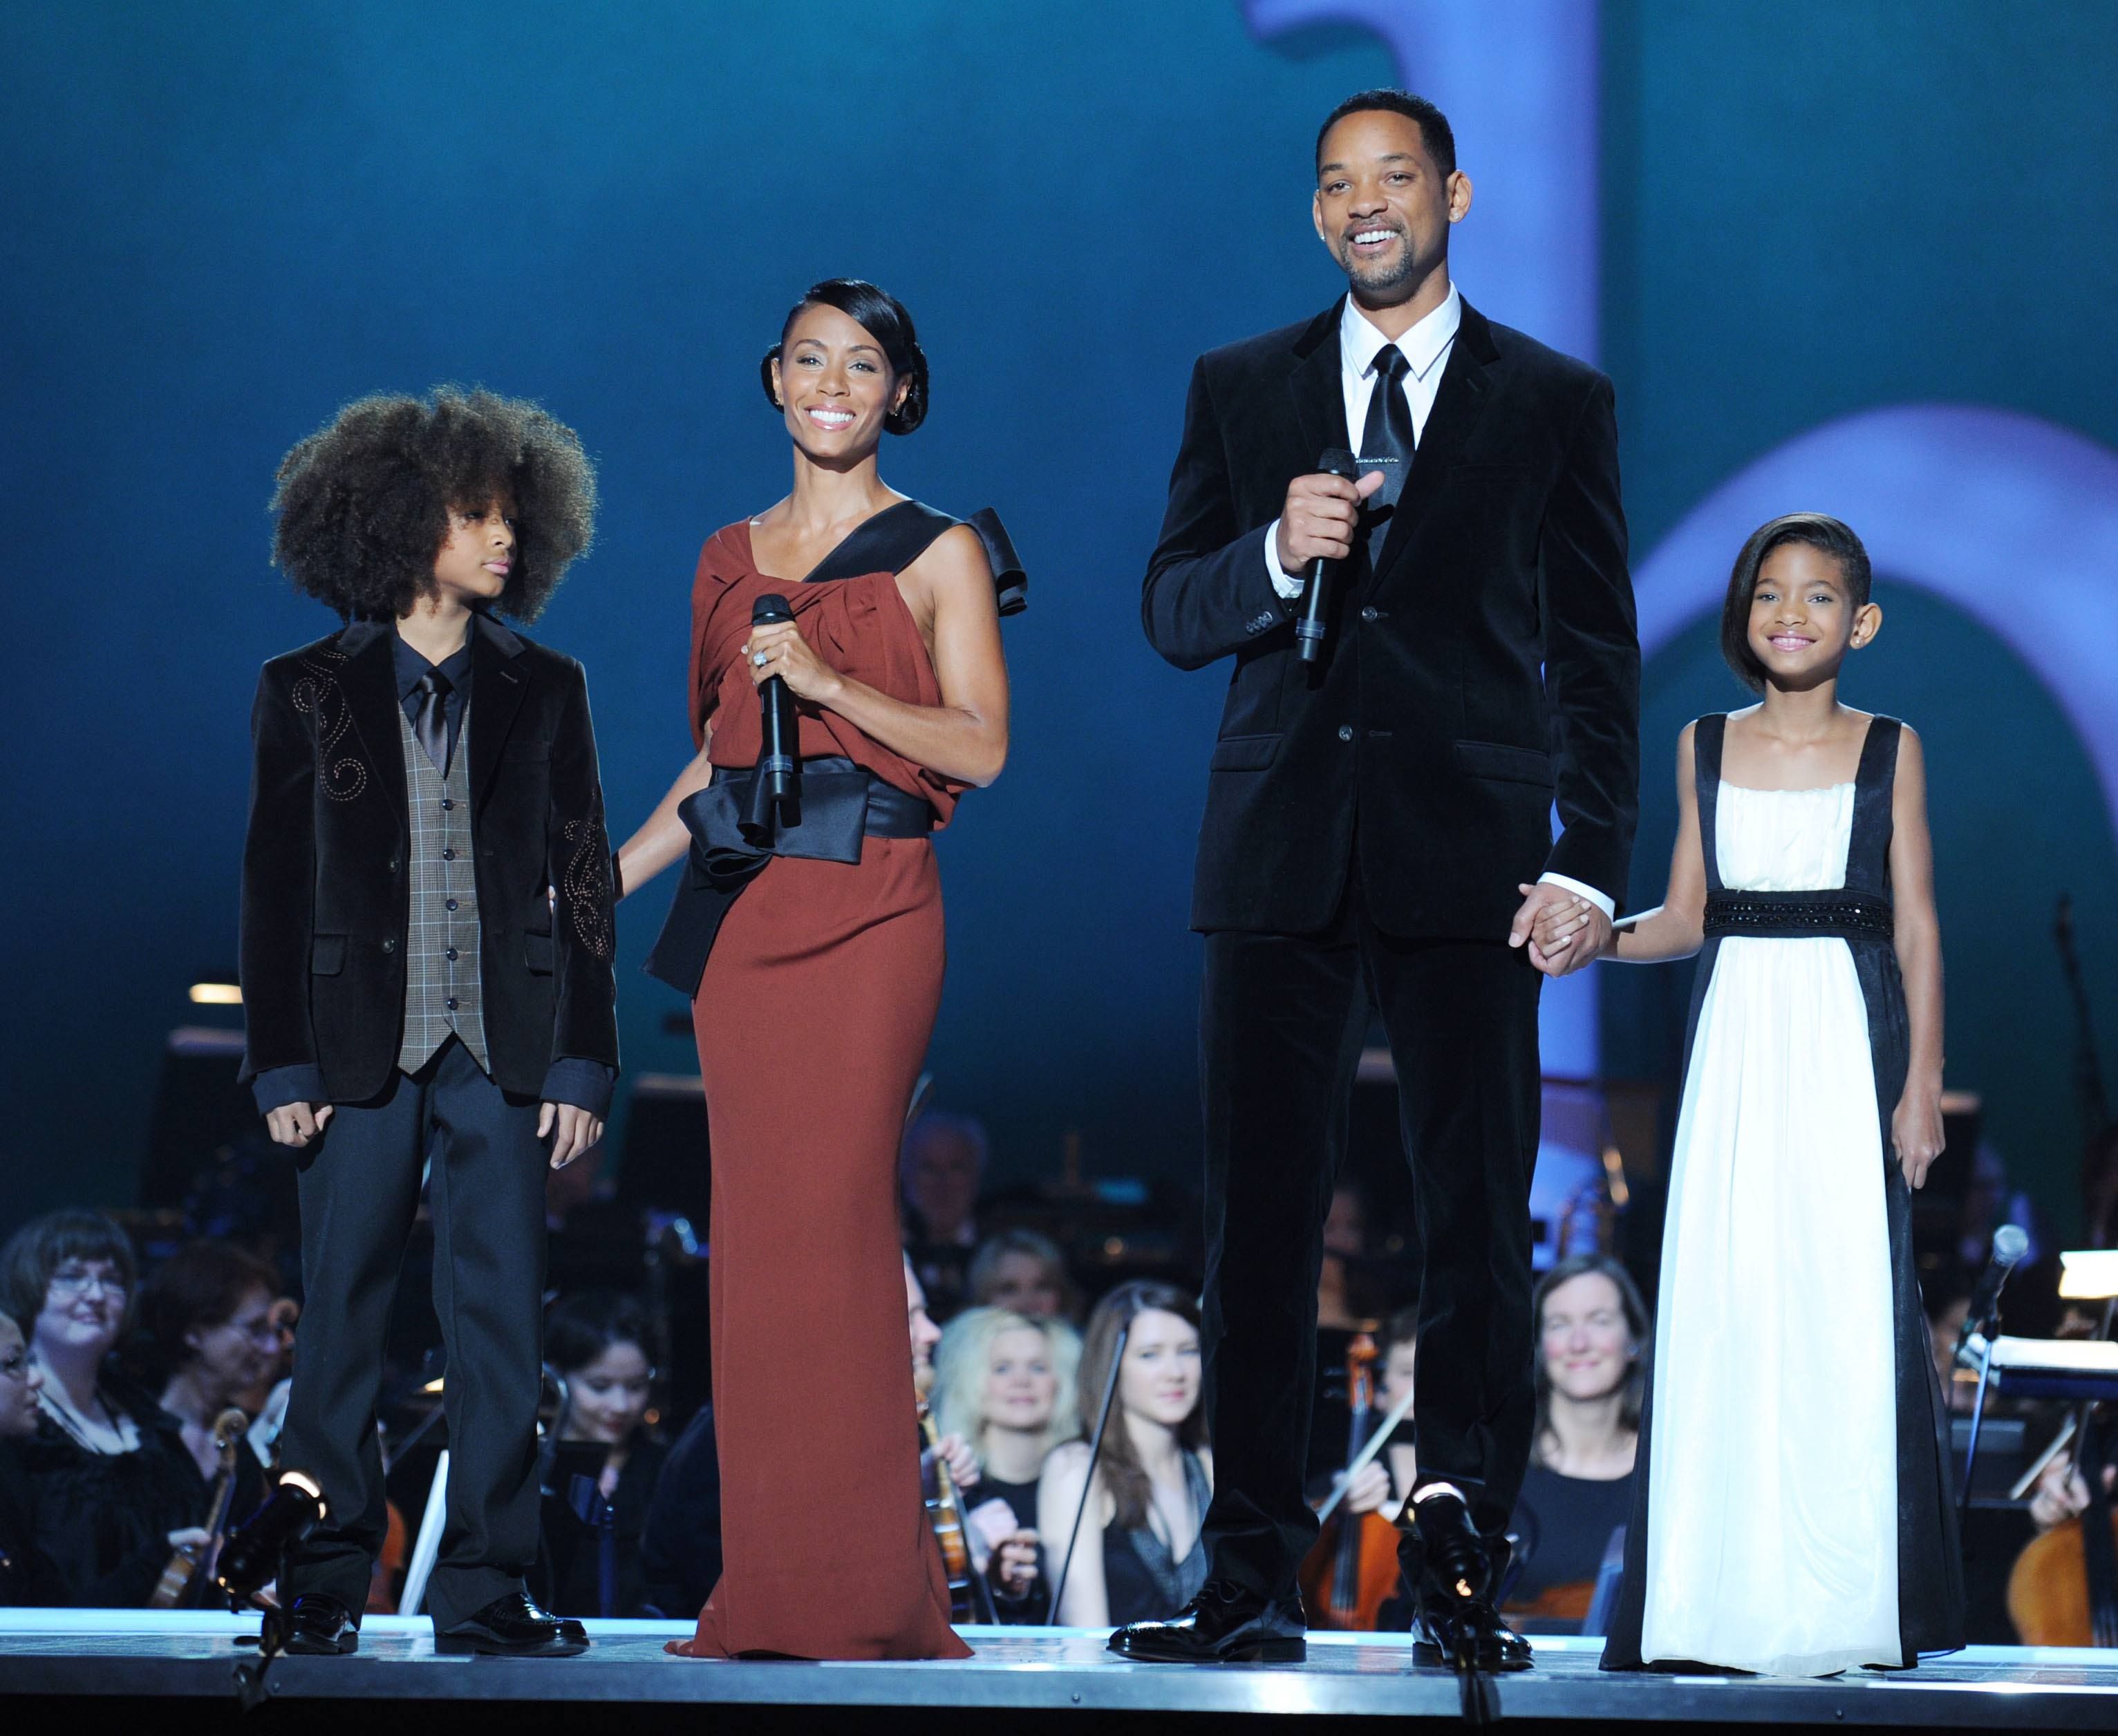 Jade Pinkett Smith and Will Smith with Jaden and Willow Smith at the Nobel Peace Prize Concert in 2009 in Oslo, Norway | Source: Getty Images